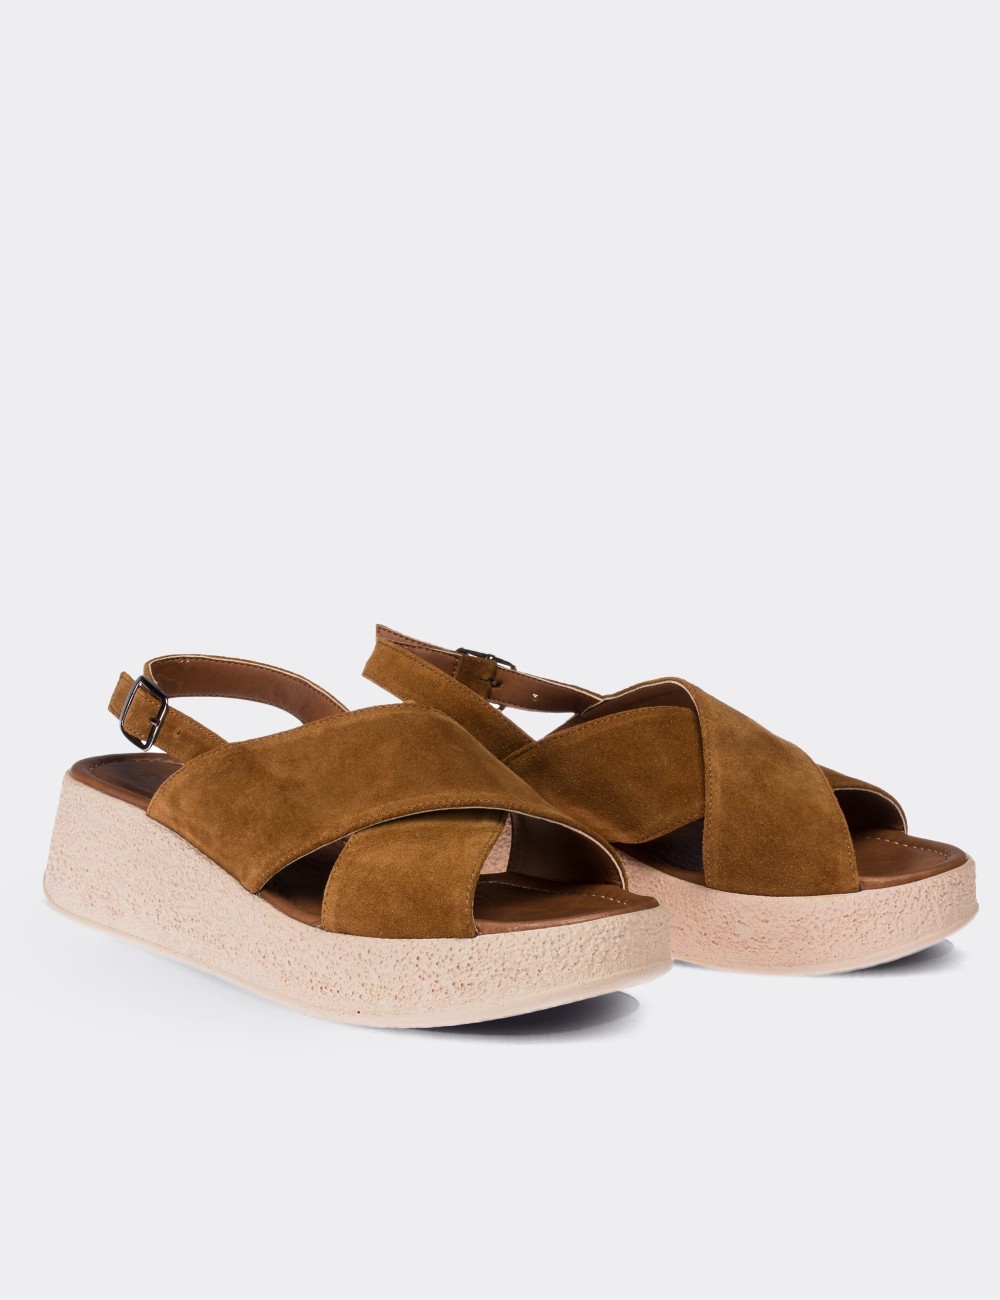 Tan Suede Leather  Sandals - 02126ZTBAP01